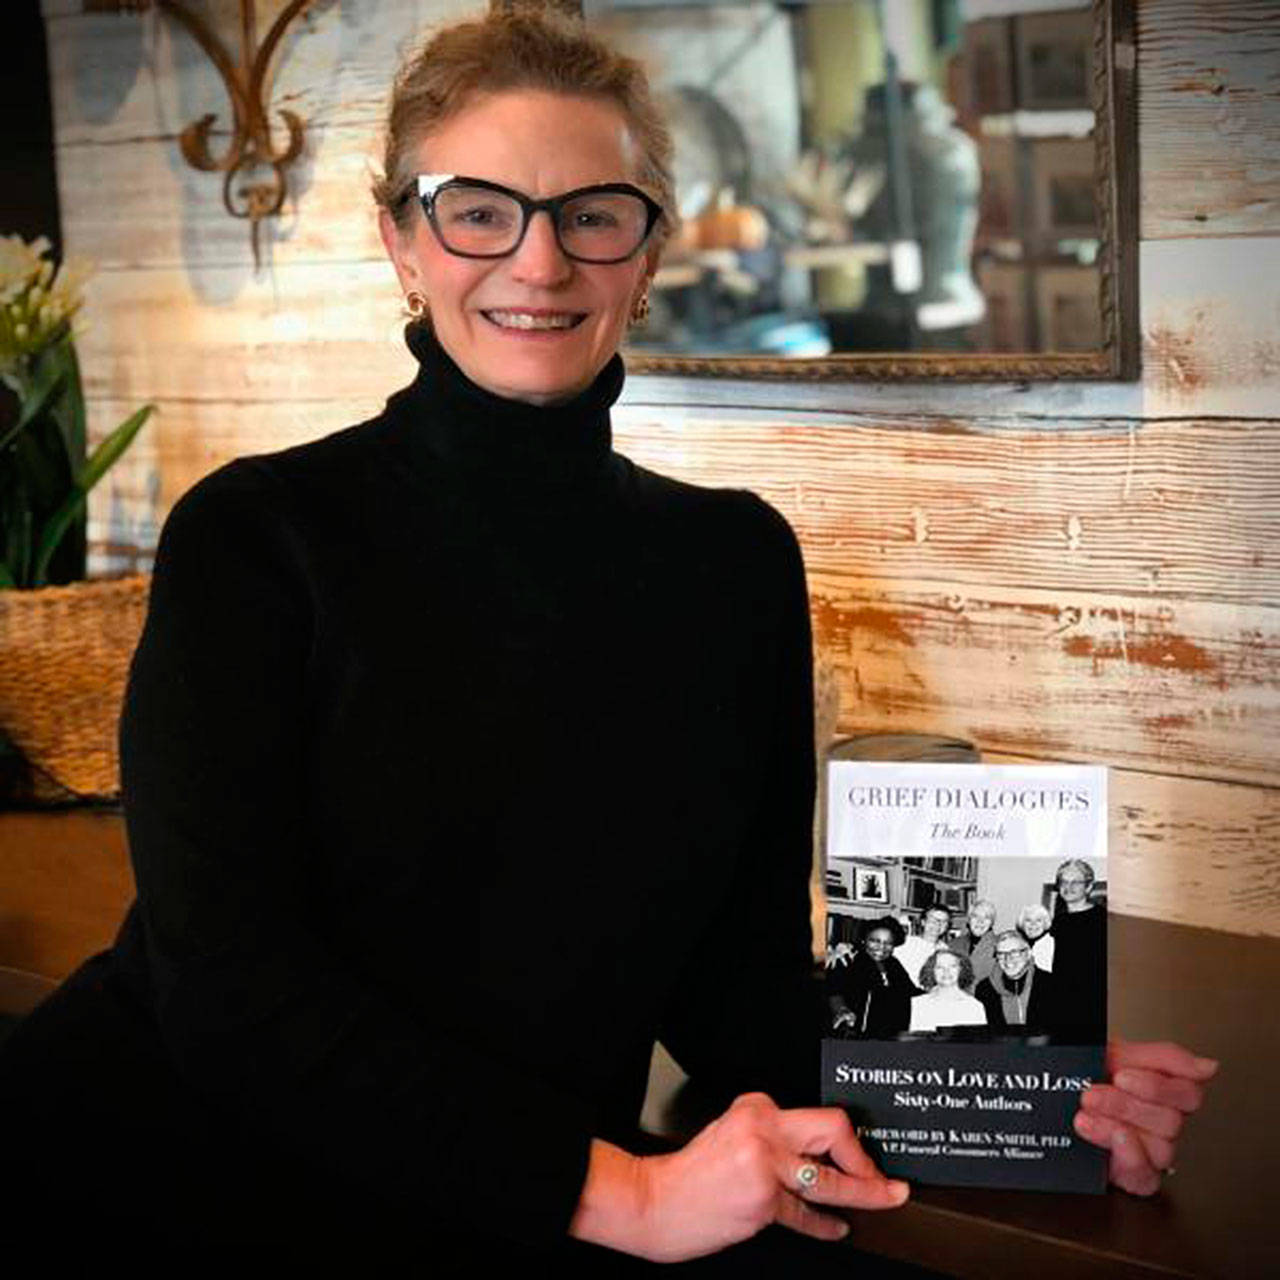 Photo courtesy of Eagle Harbor Book Company | Elizabeth Coplan, along with several other contributing authors, will visit Eagle Harbor Book Company at 7 p.m. Thursday, March 14 to read from the multi-author collection “Grief Dialogues The Book: Stories on Love and Loss.”